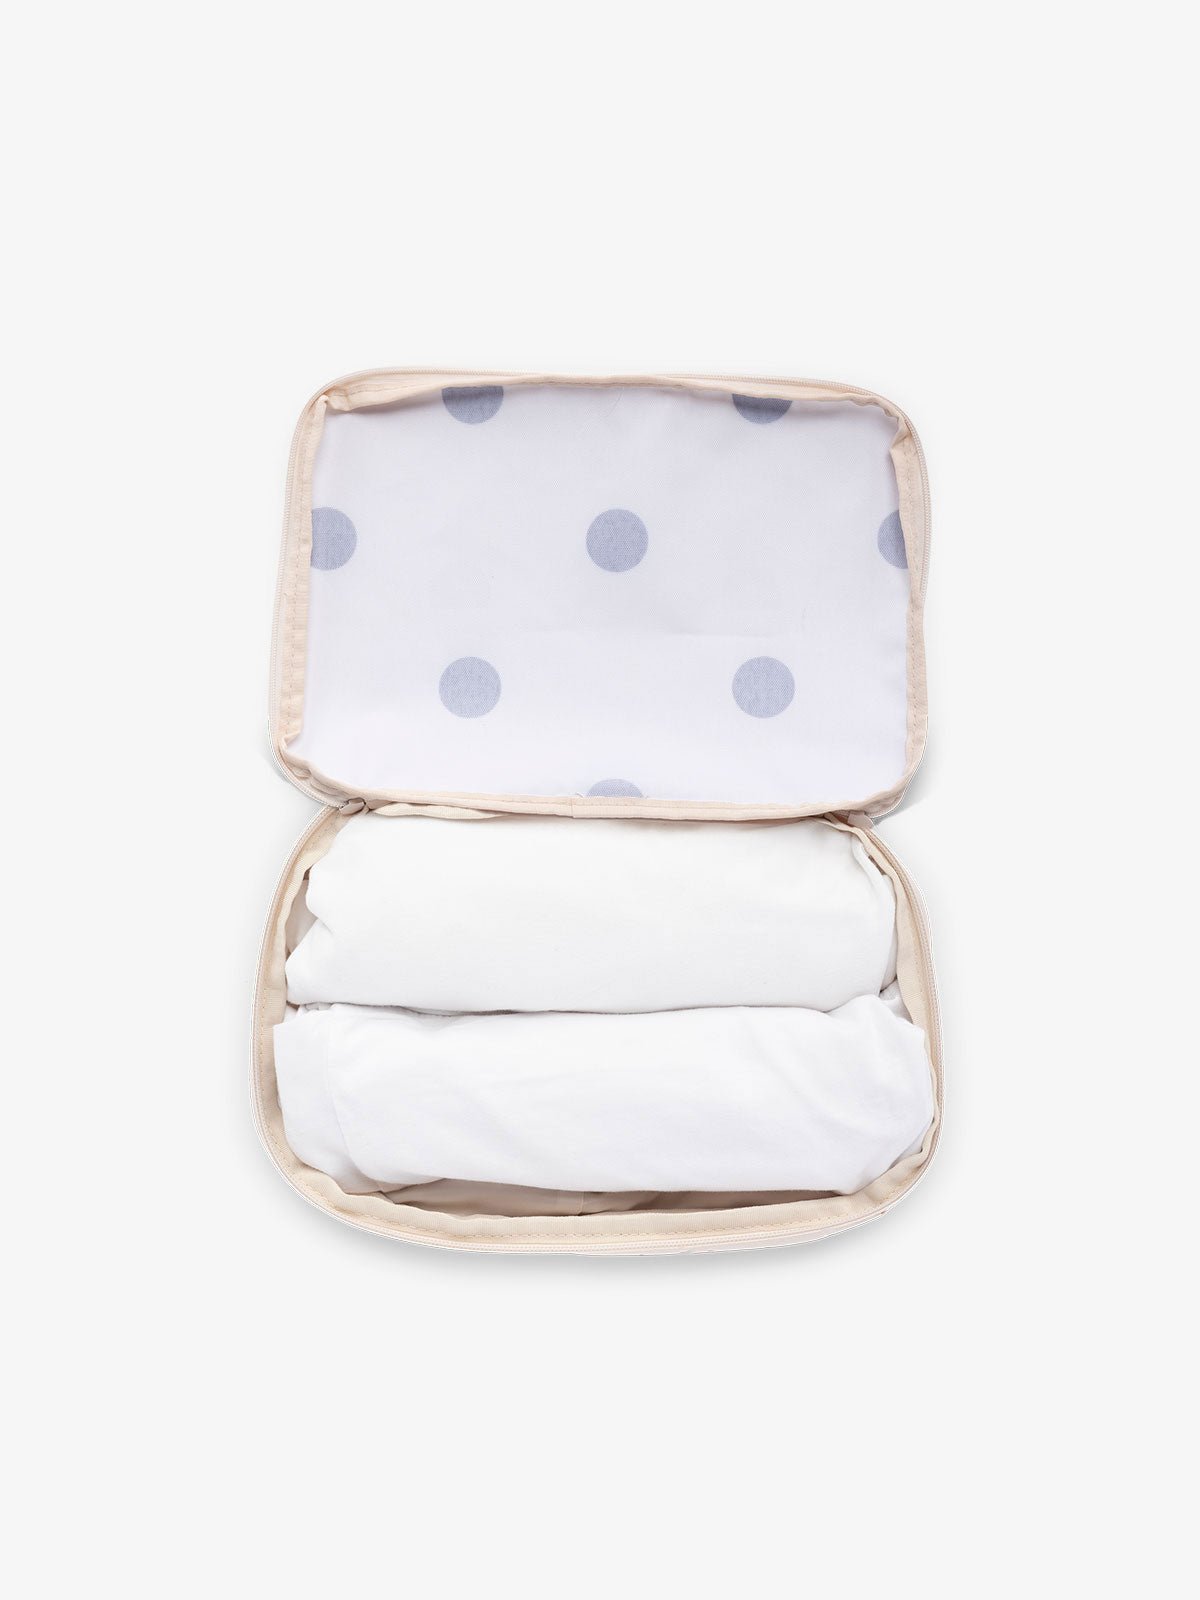 CALPAK small packing cubes for travel made with durable material in black and white polka dot